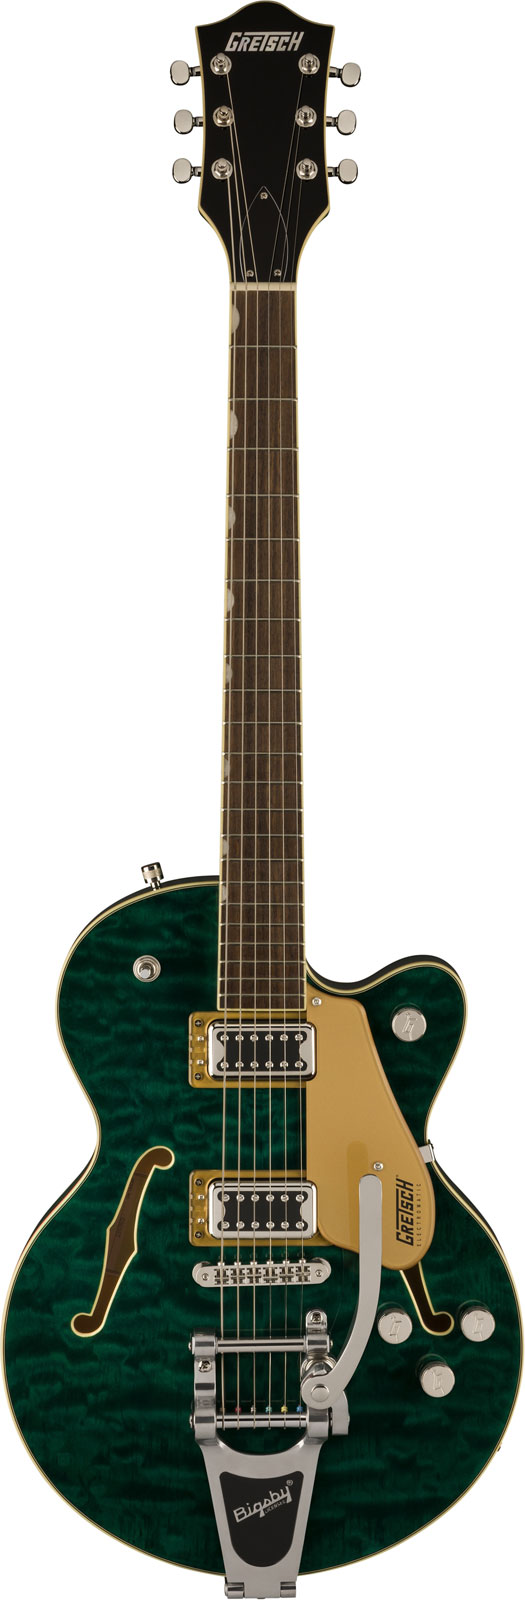 GRETSCH GUITARS G5655T-QM ELECTROMATIC CENTER BLOCK JR. SINGLE-CUT QUILTED MAPLE WITH BIGSBY MARIANA